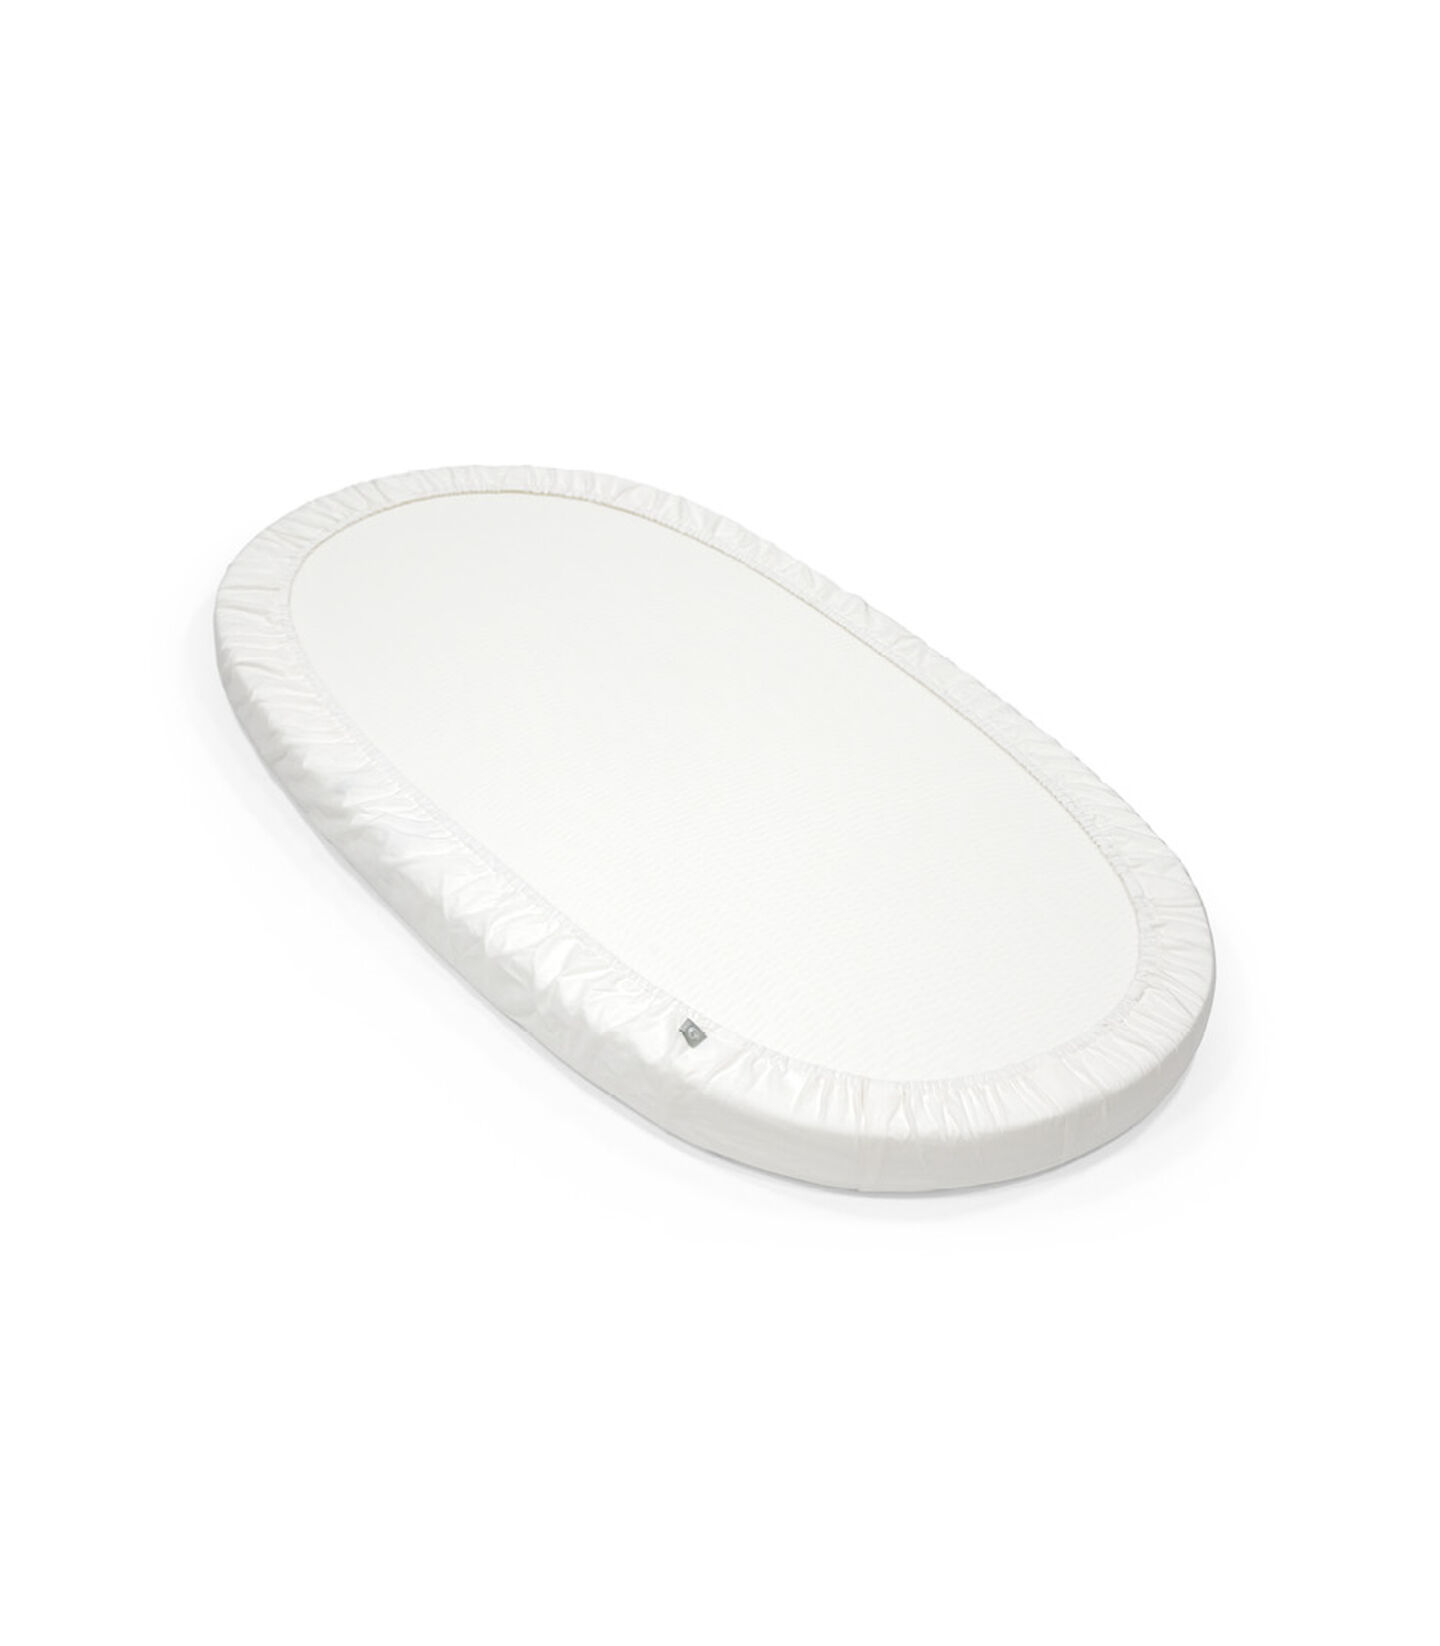 Stokke® Sleepi™ Bed Mattress with Fitted Sheet White. Bottom side, detail. view 2